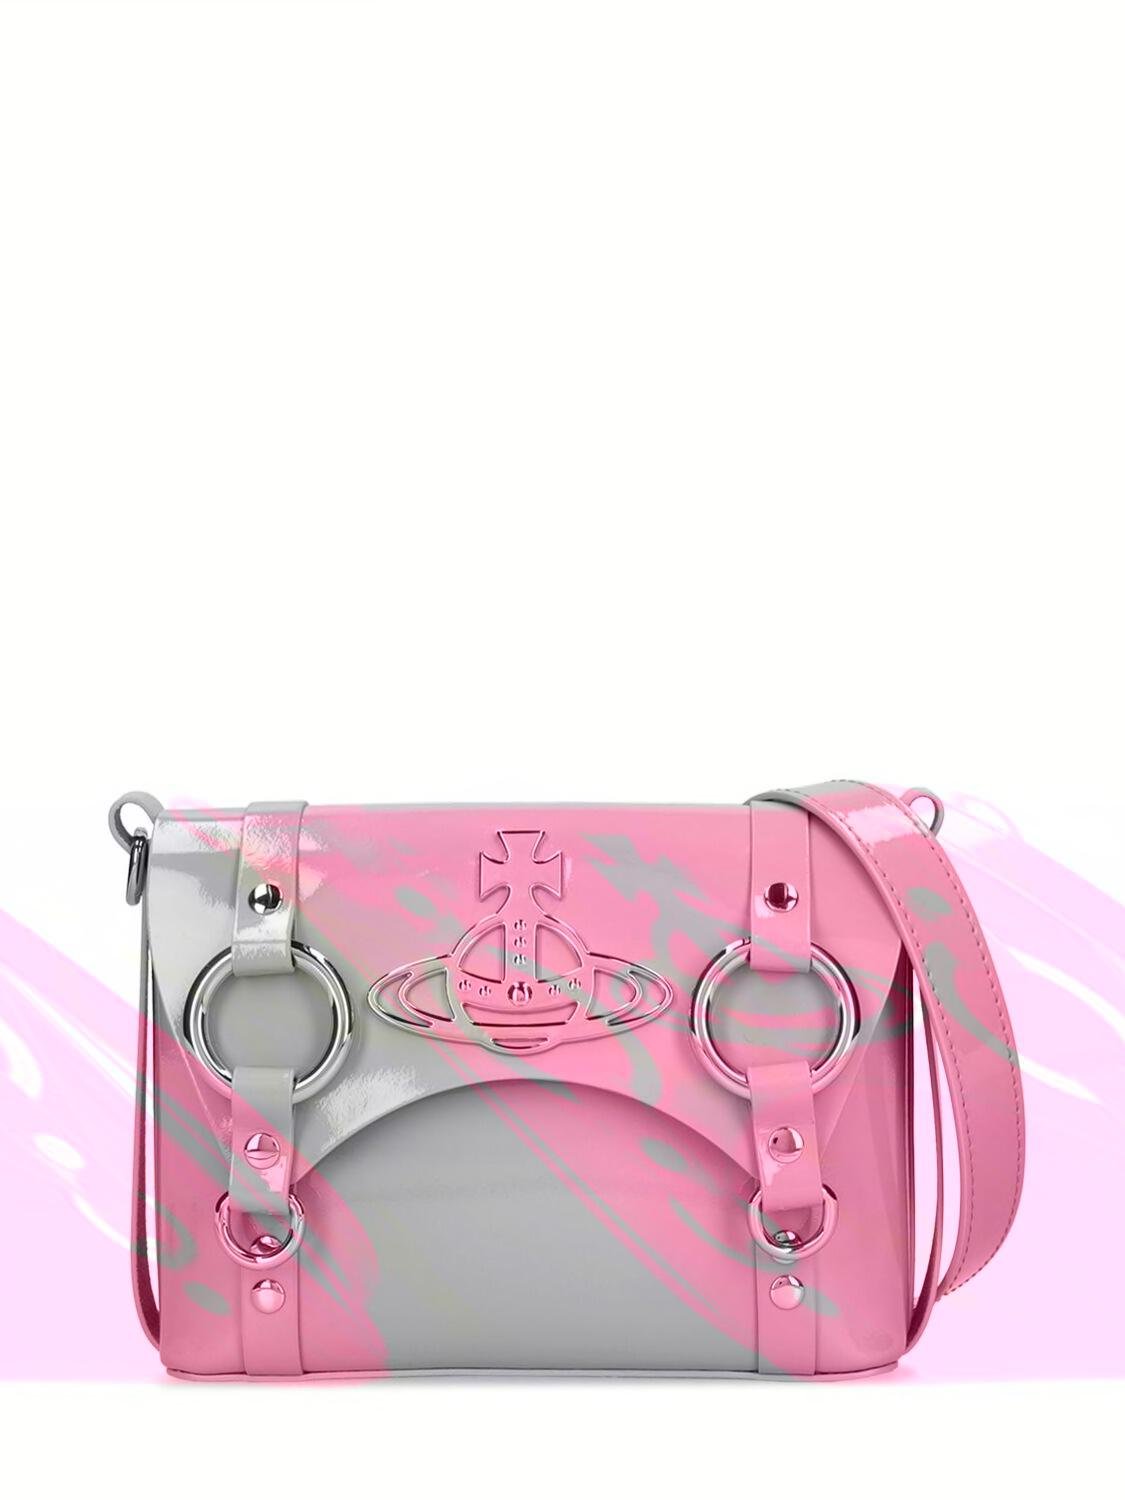 Kim Patent Leather Crossbody Bag by VIVIENNE WESTWOOD